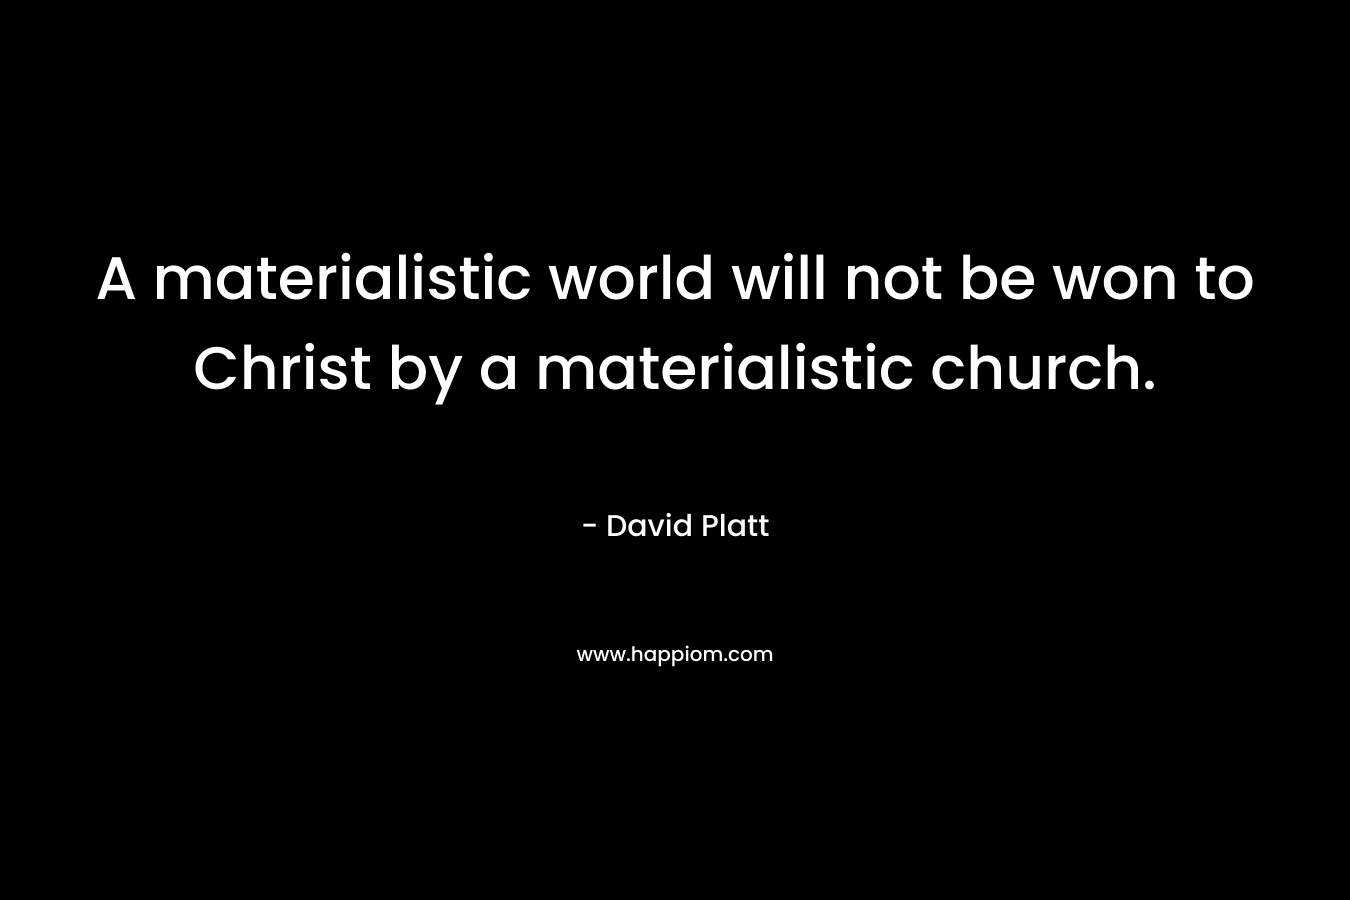 A materialistic world will not be won to Christ by a materialistic church. – David Platt